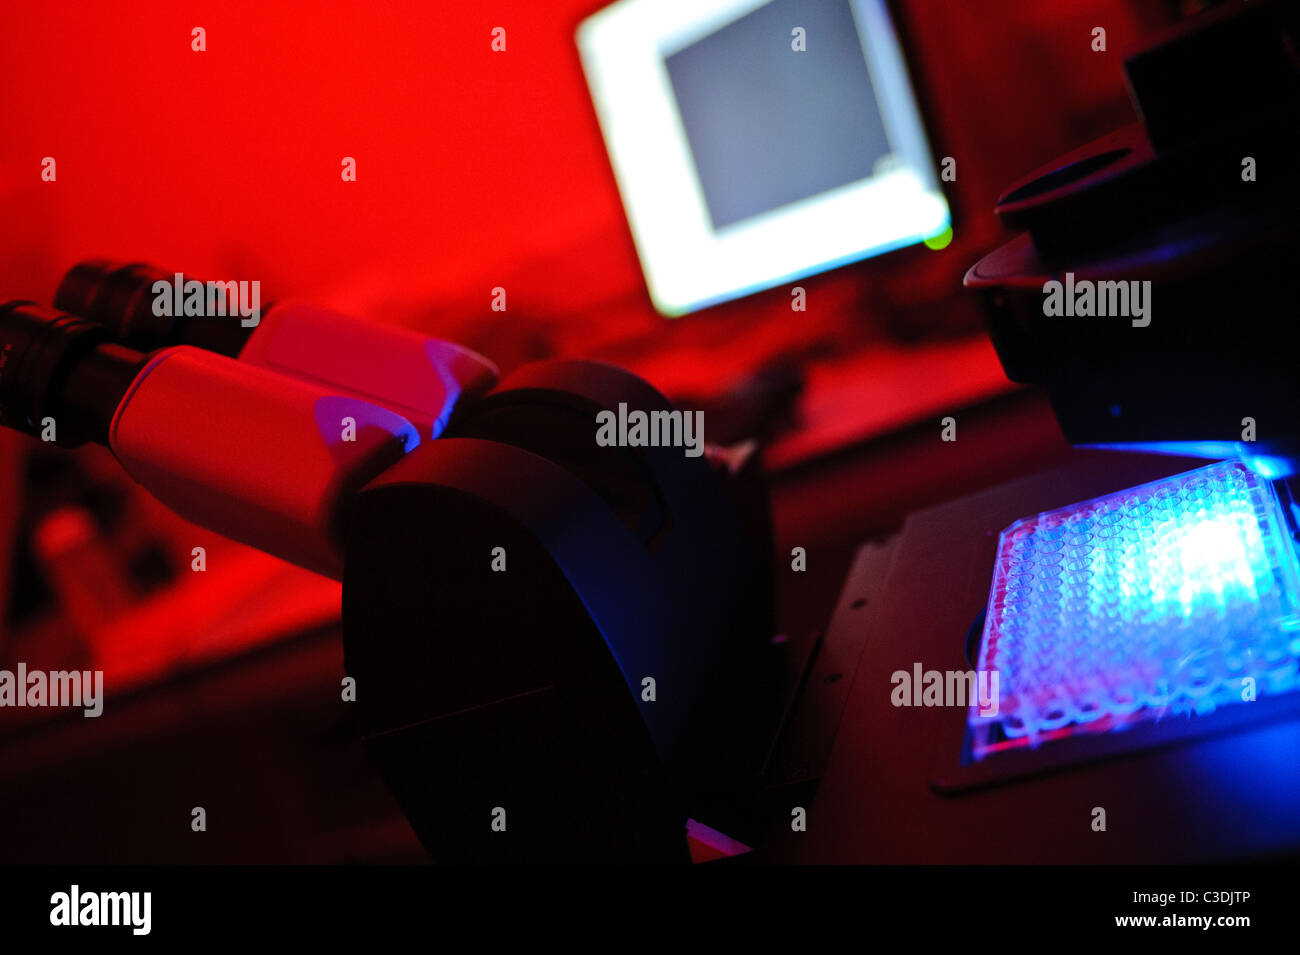 microscope in darkroom lit bright red with computer screen in background and green and blue lights test tubes Stock Photo